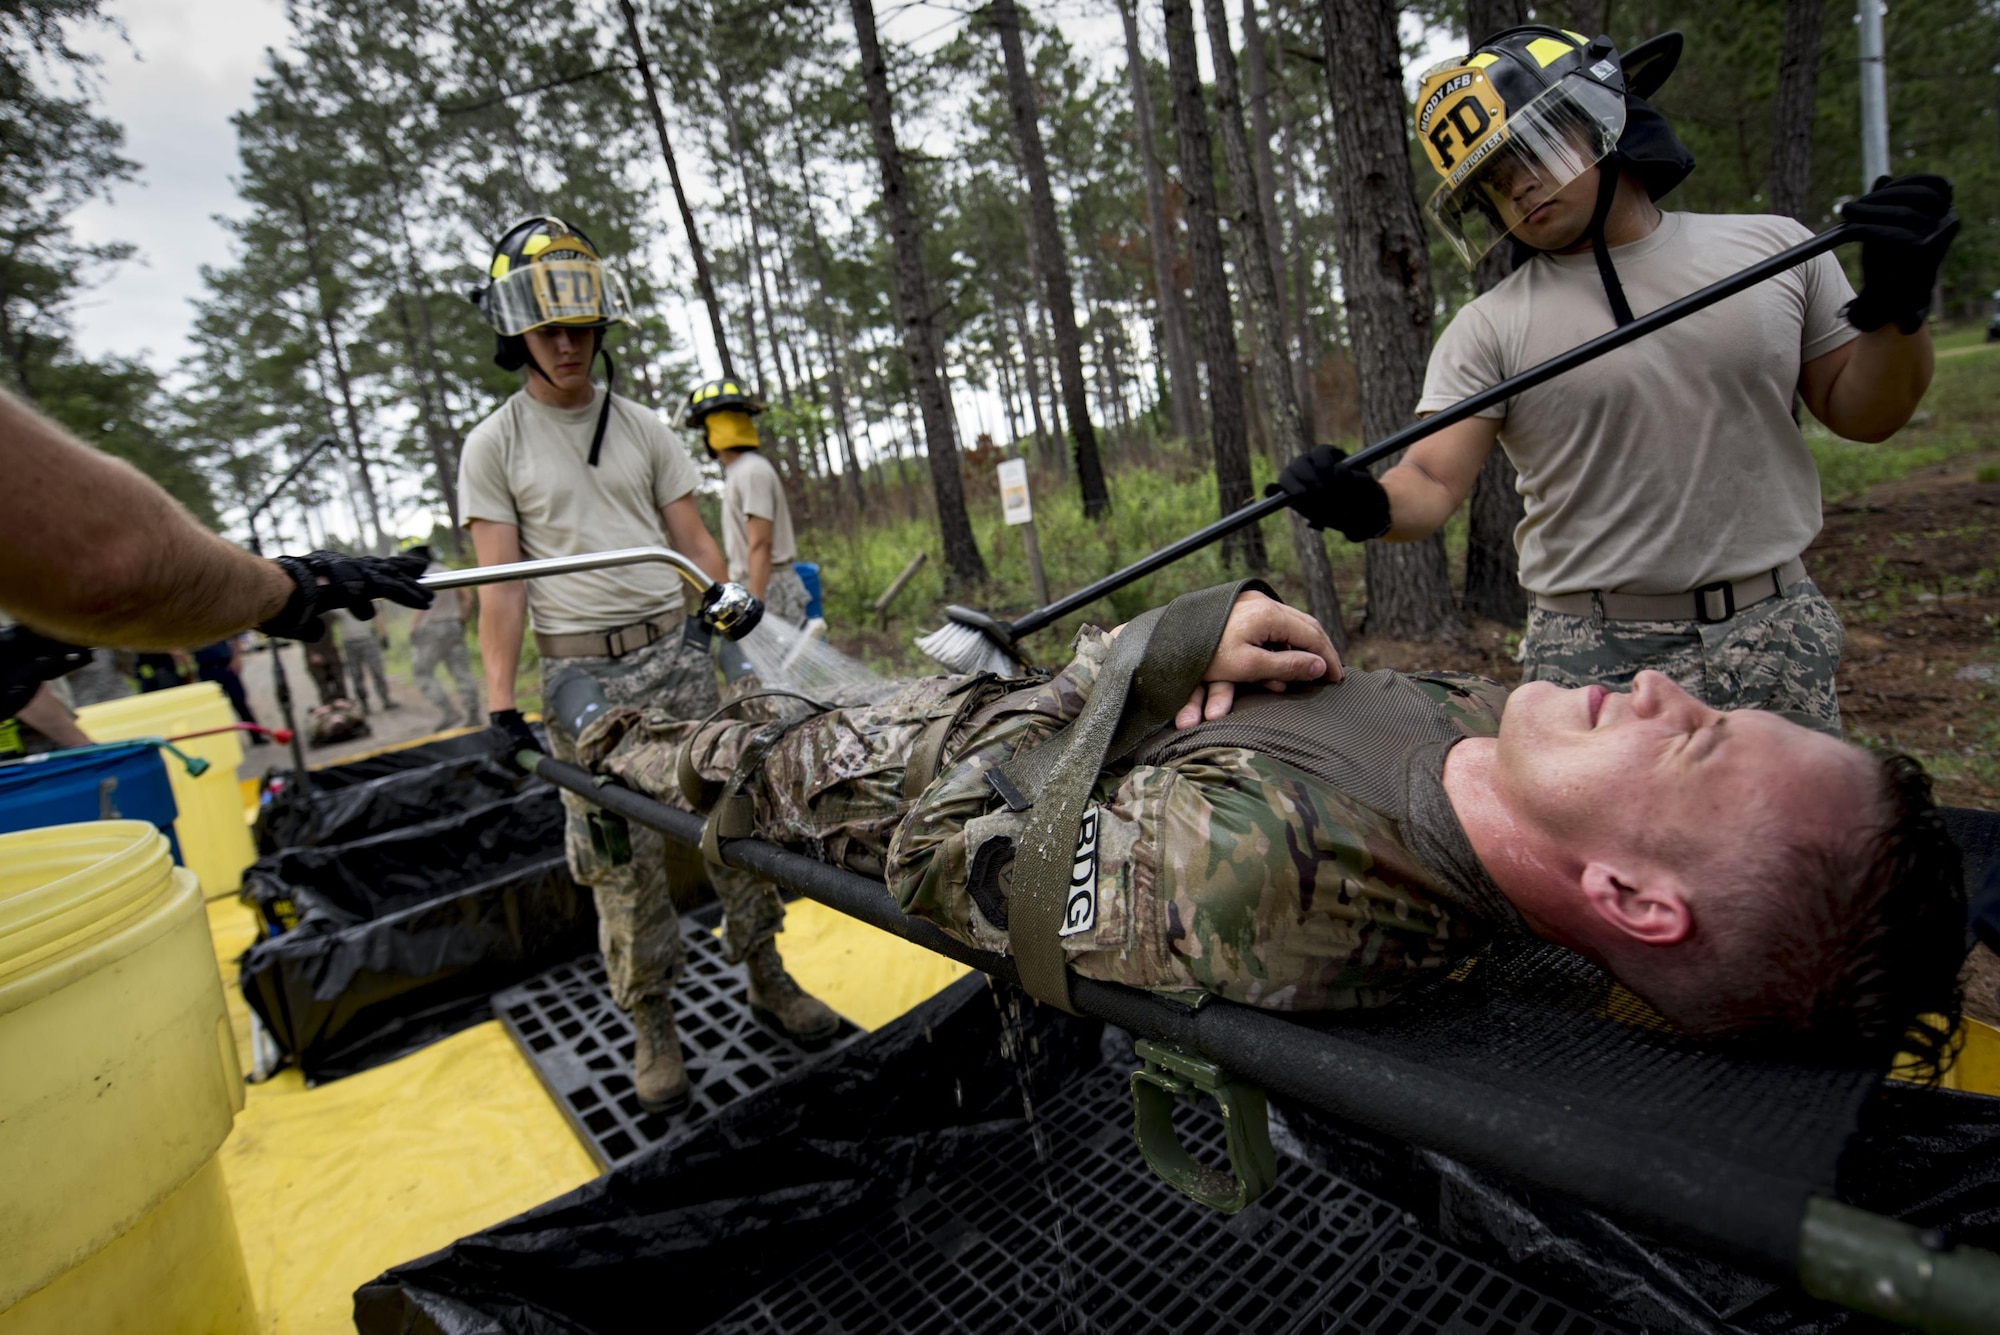 Members of the 23d Civil Engineer Squadron fire department conduct decontamination procedures during a simulated explosives and hazardous material scenario, May 25, 2017, at Moody Air Force Base, Ga. The exercise simulated initial responses from first responders who then contacted other appropriate units after assessing the potential threat while also assisting the simulated victims of hazardous materials. (U.S. Air Force photo by Airman 1st Class Daniel Snider)